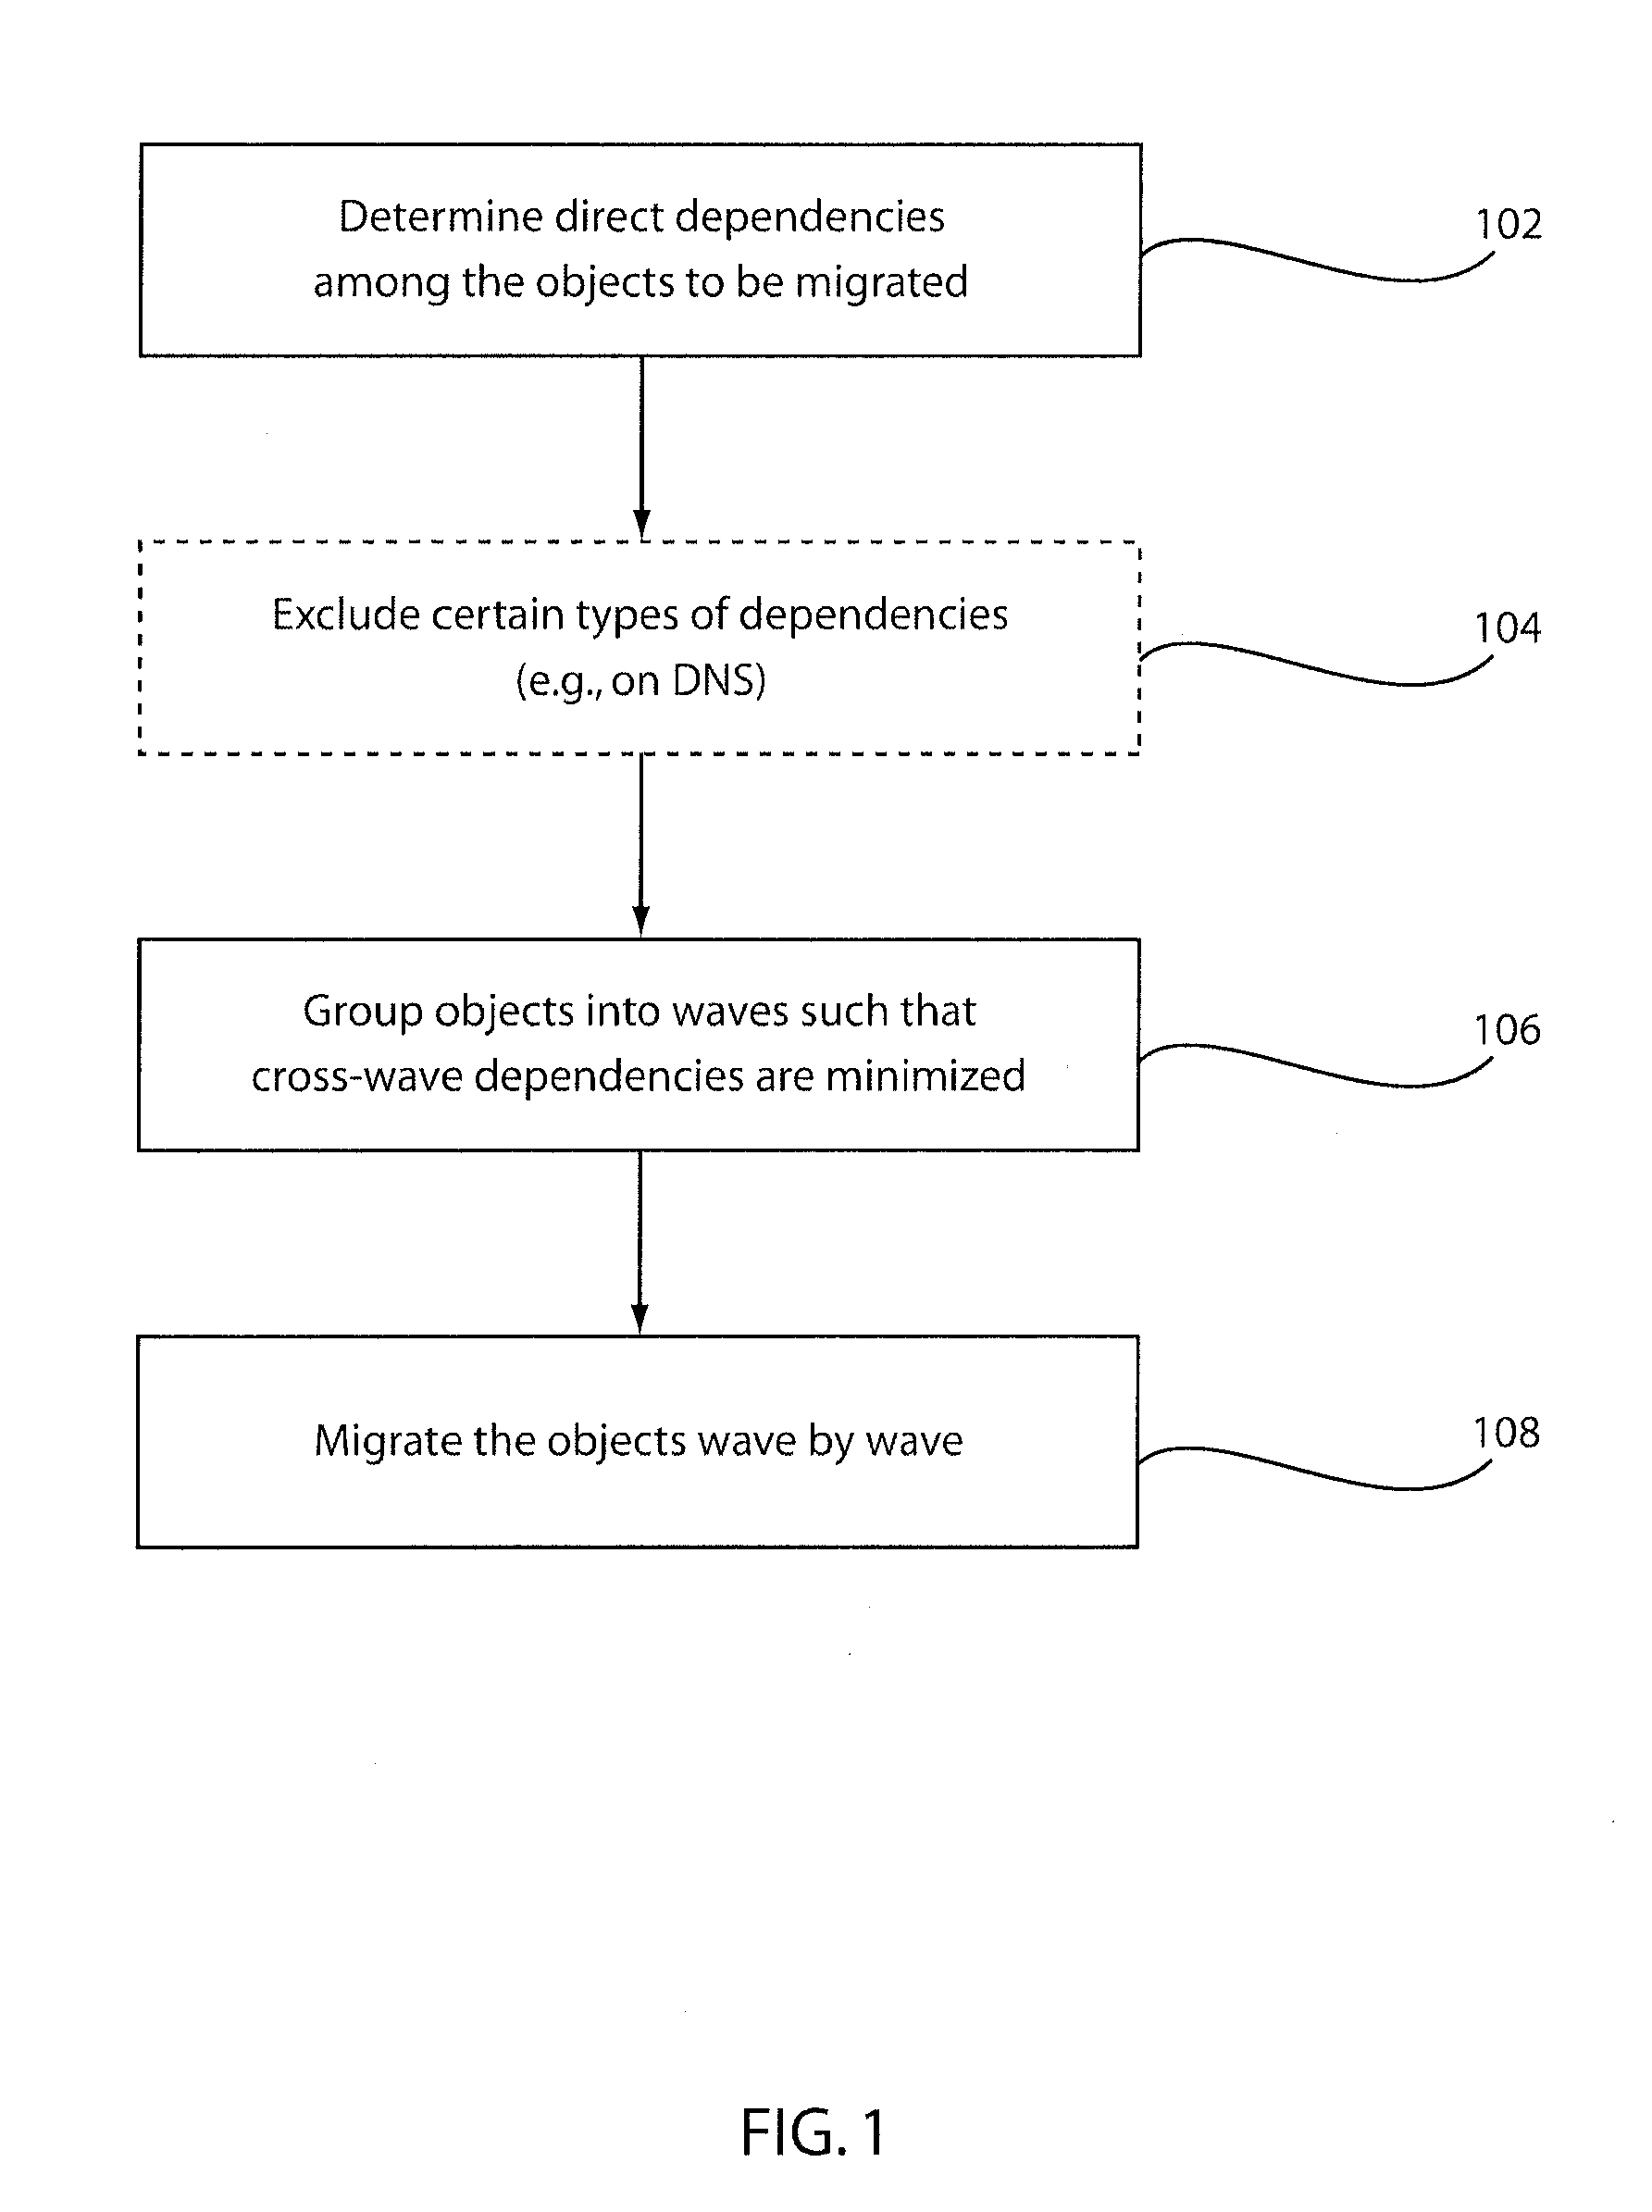 System and method for object migration using waves